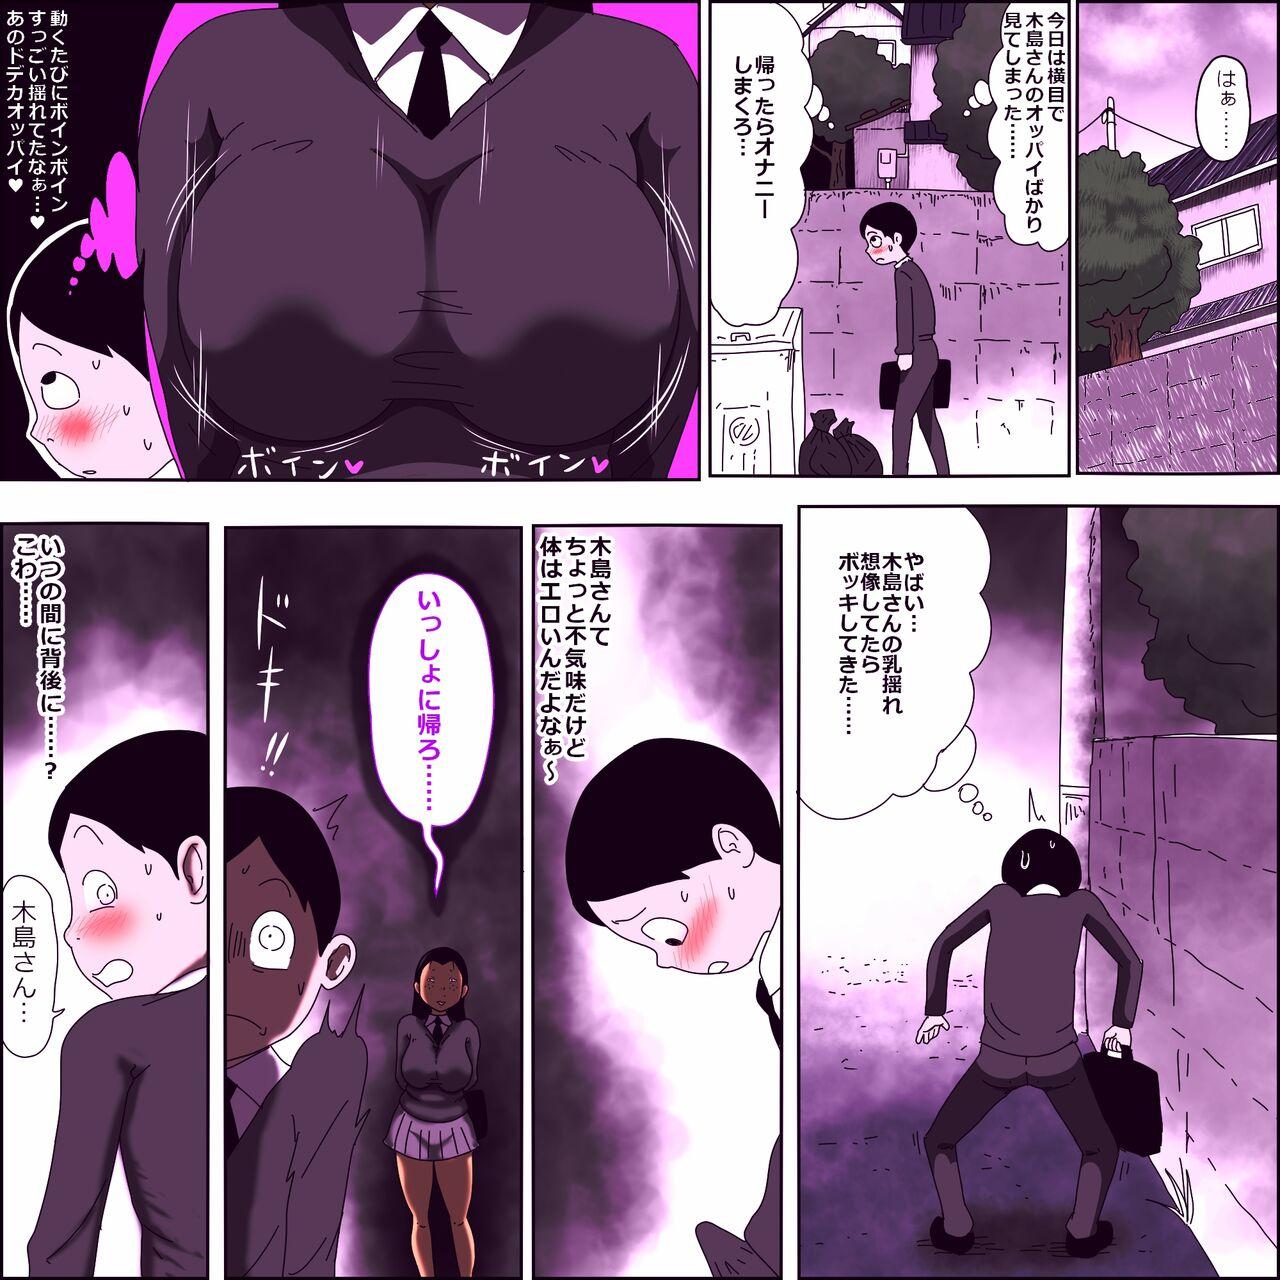 Cheating A ugly girl in a class with lewd eyes - Original Gay Medic - Page 12